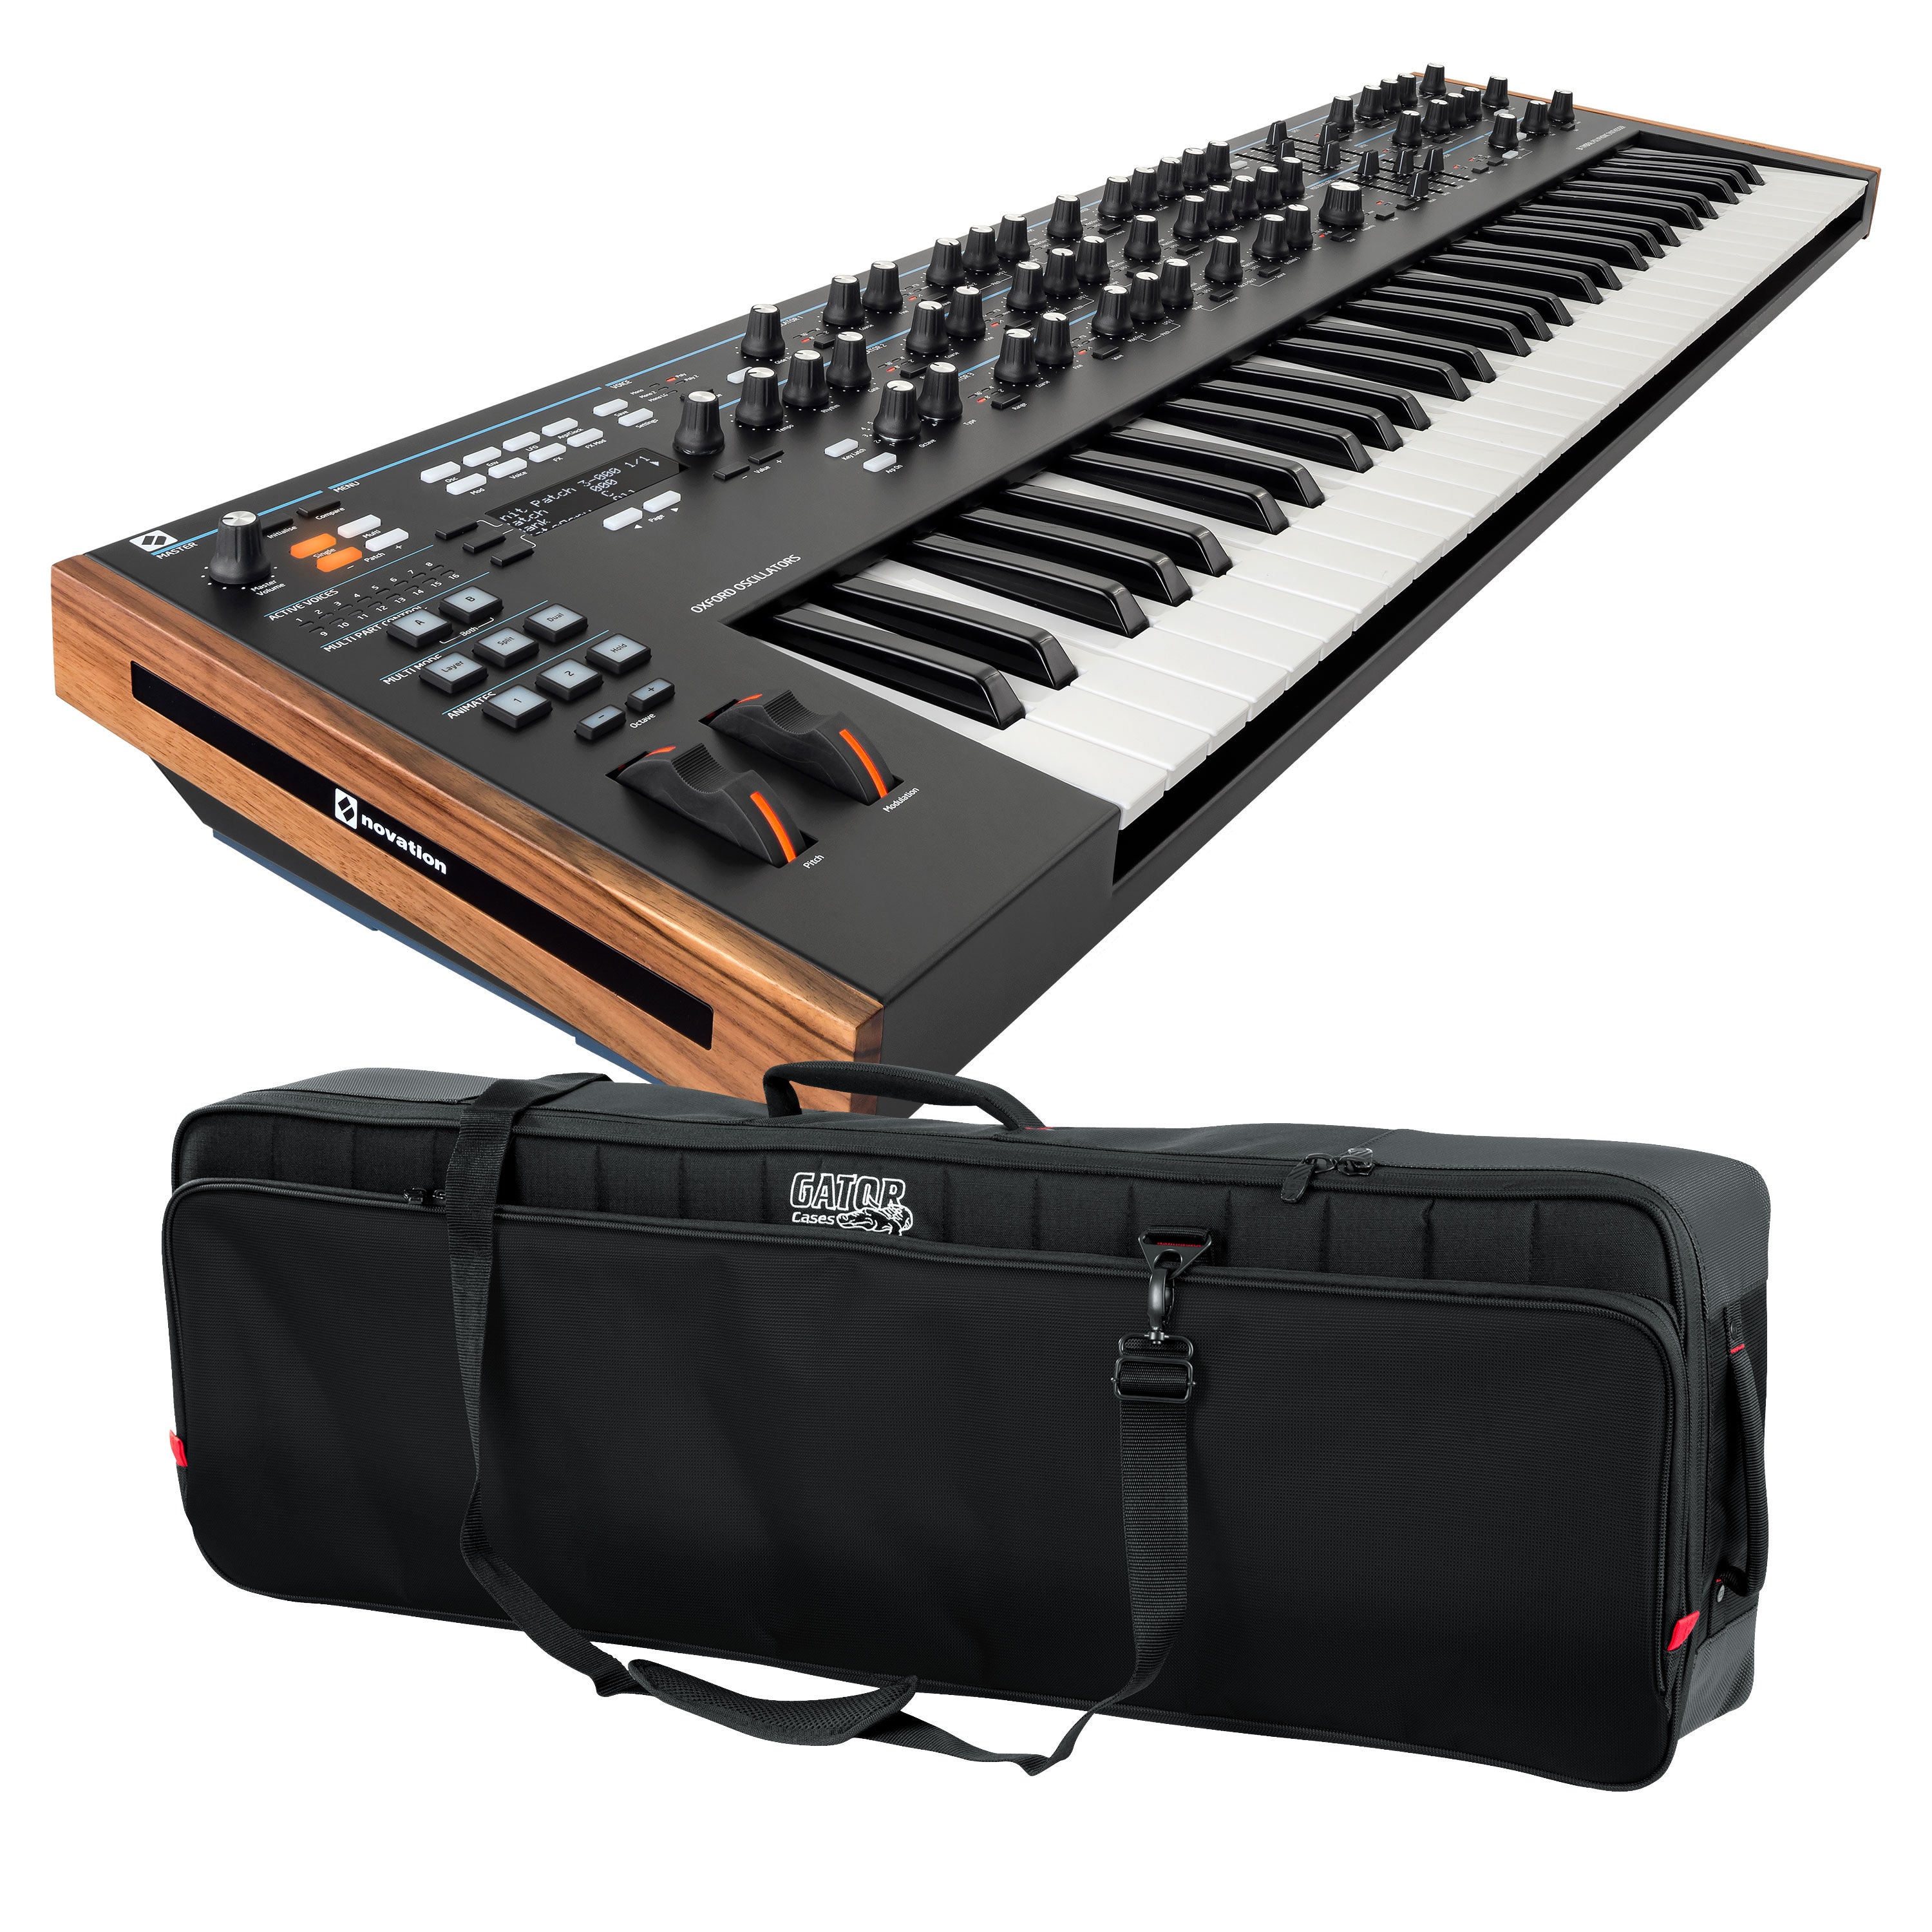 Collage of everything included in the Novation Summit 16-Voice Polyphonic Keyboard Synthesizer CARRY BAG KIT bundle